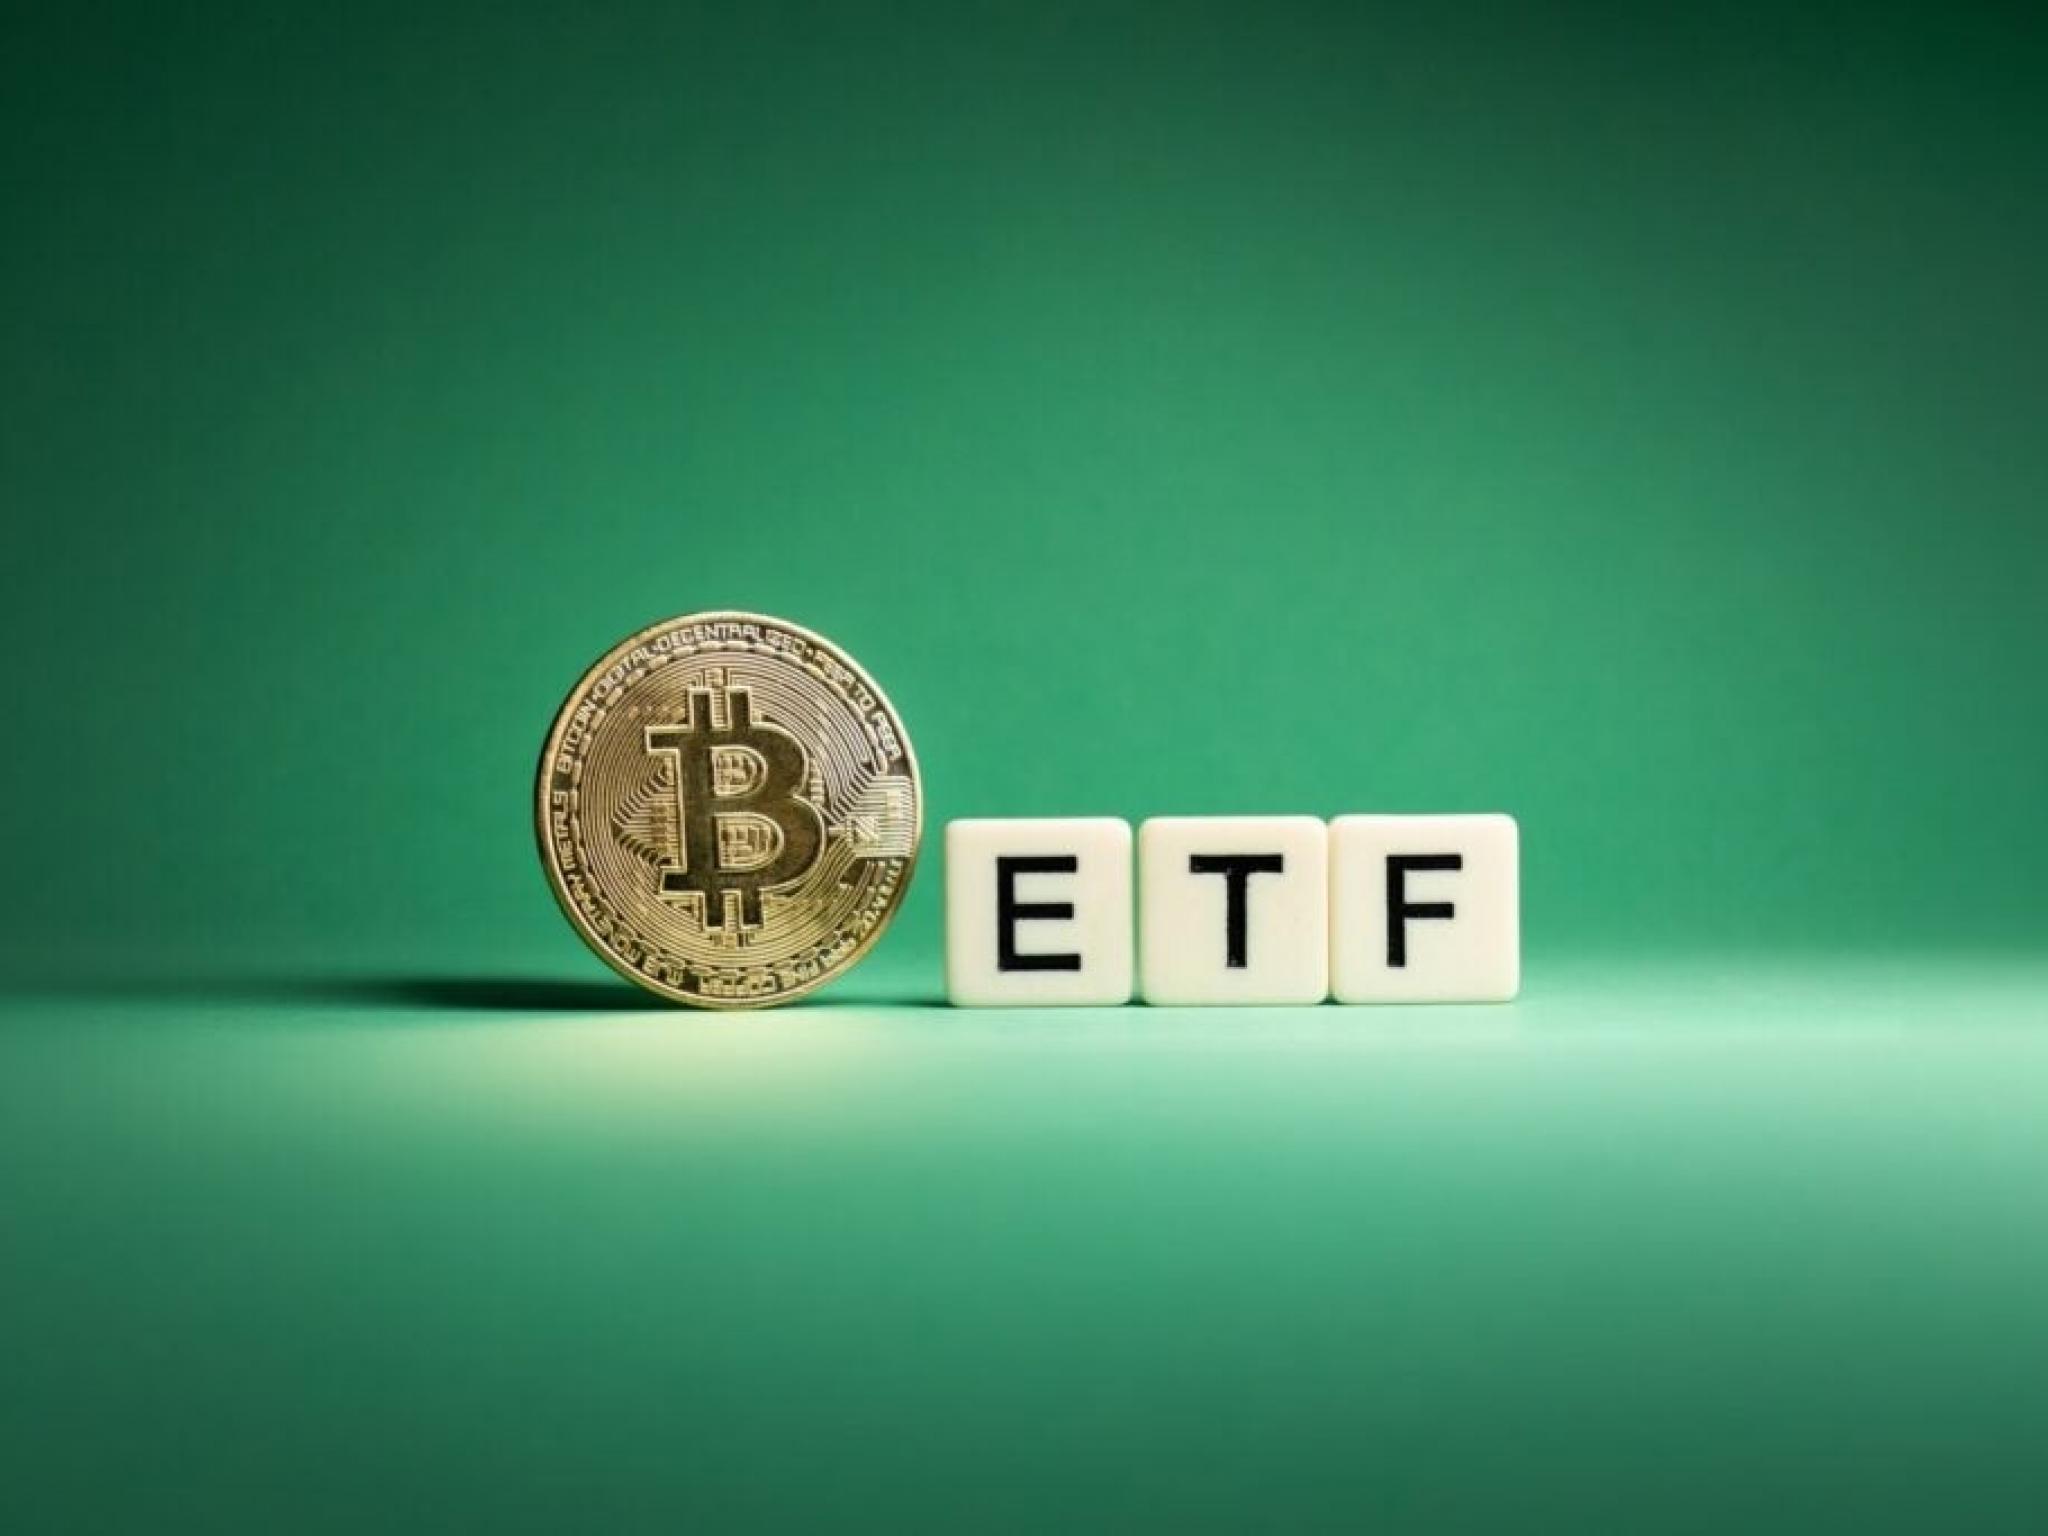  bitcoin-tumbles-3-ethereum-plunges-below-3200-what-is-going-on-with-etfs 